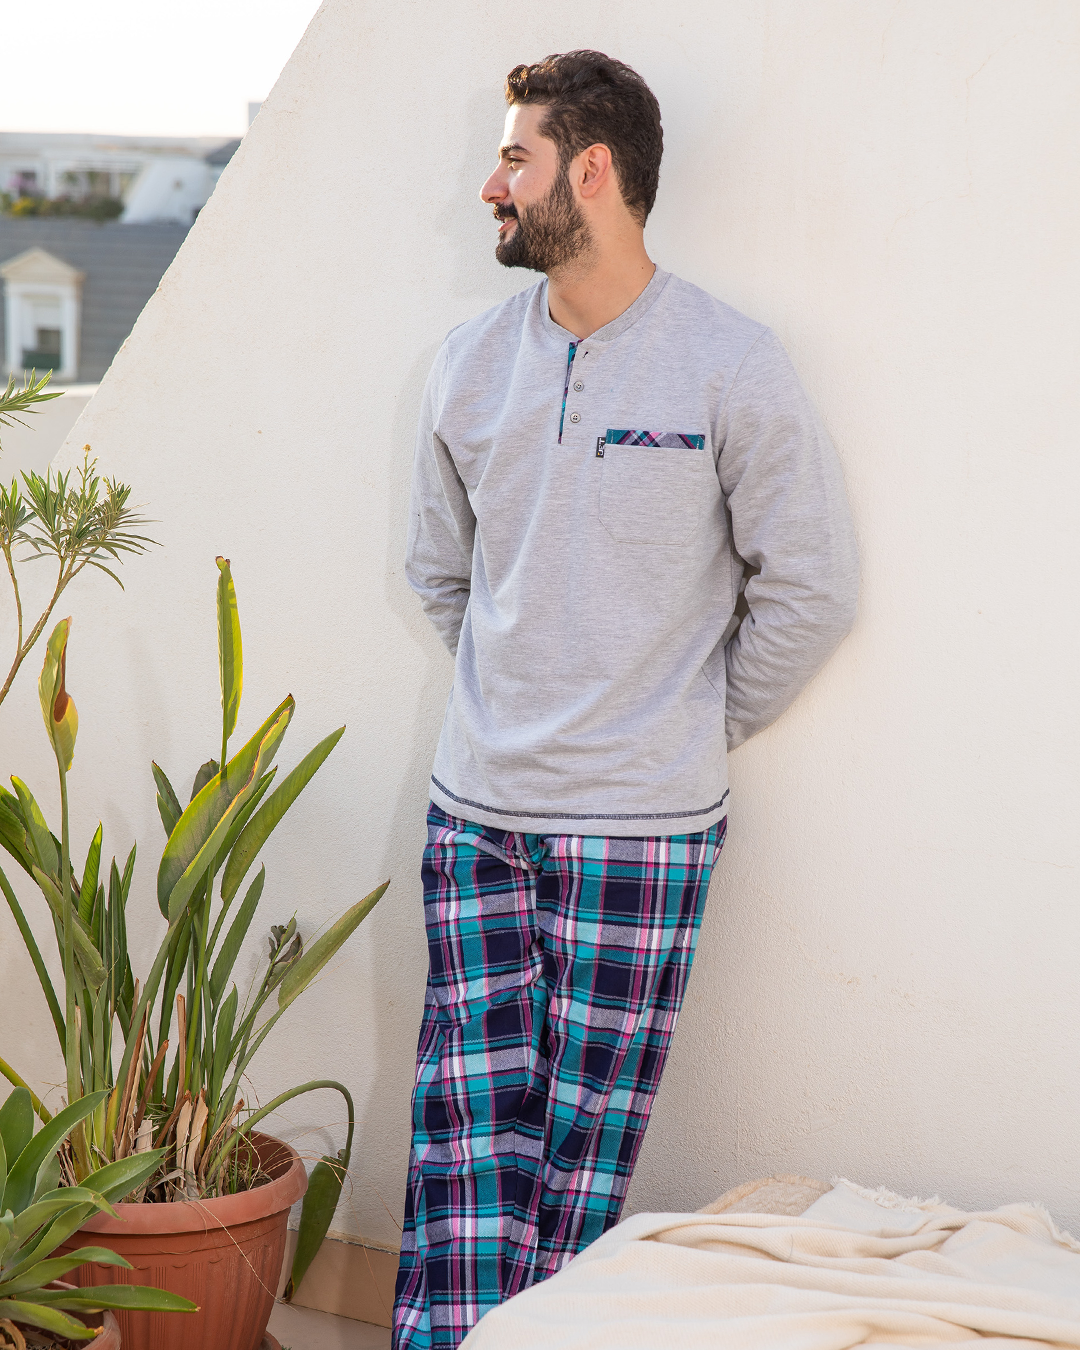 Men's pajamas with a button-up neck and checkered pants